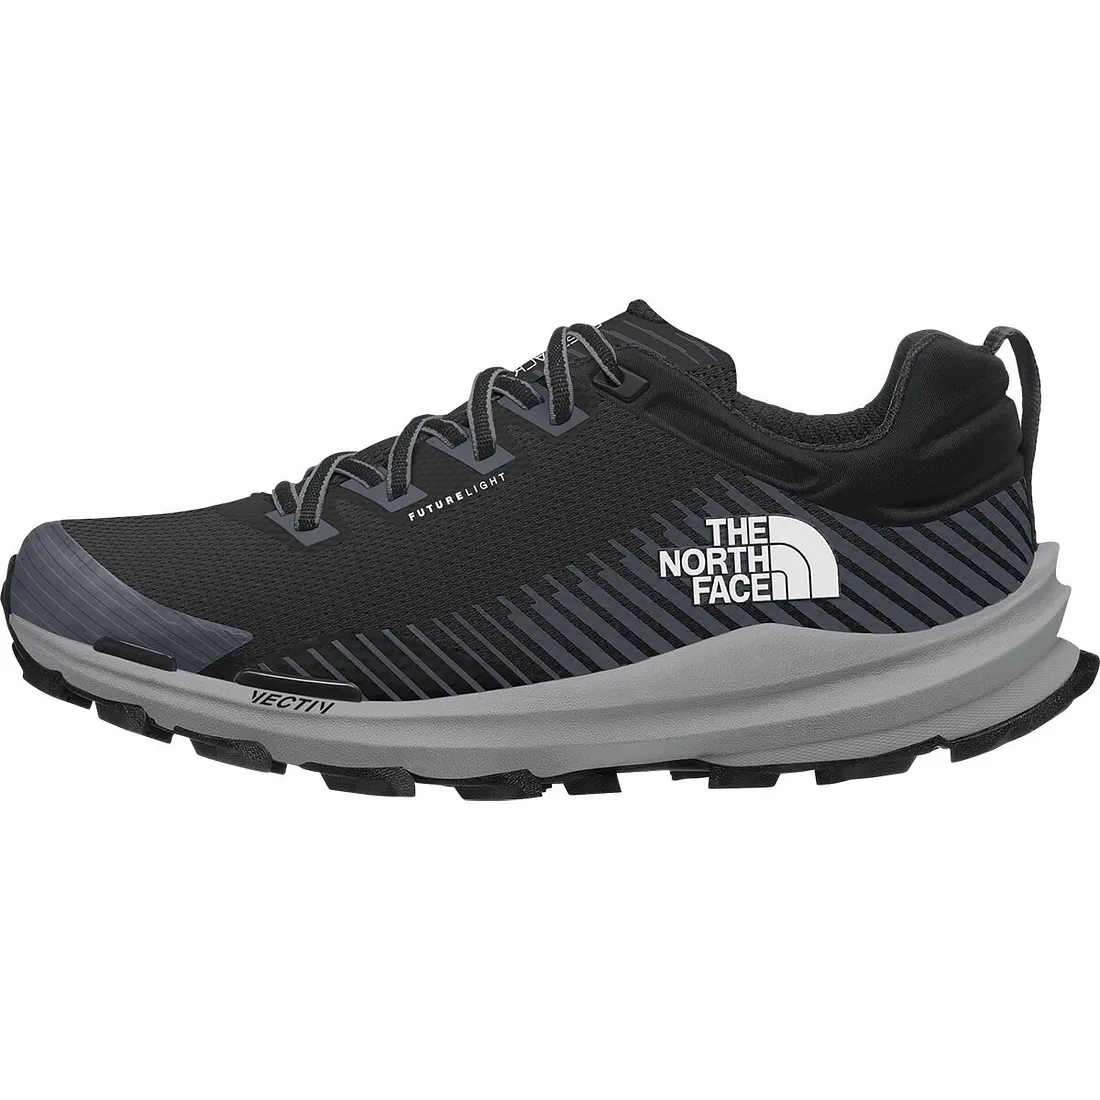 The North Face Vectiv Fastpack Futurelight Women's Hiking Shoes